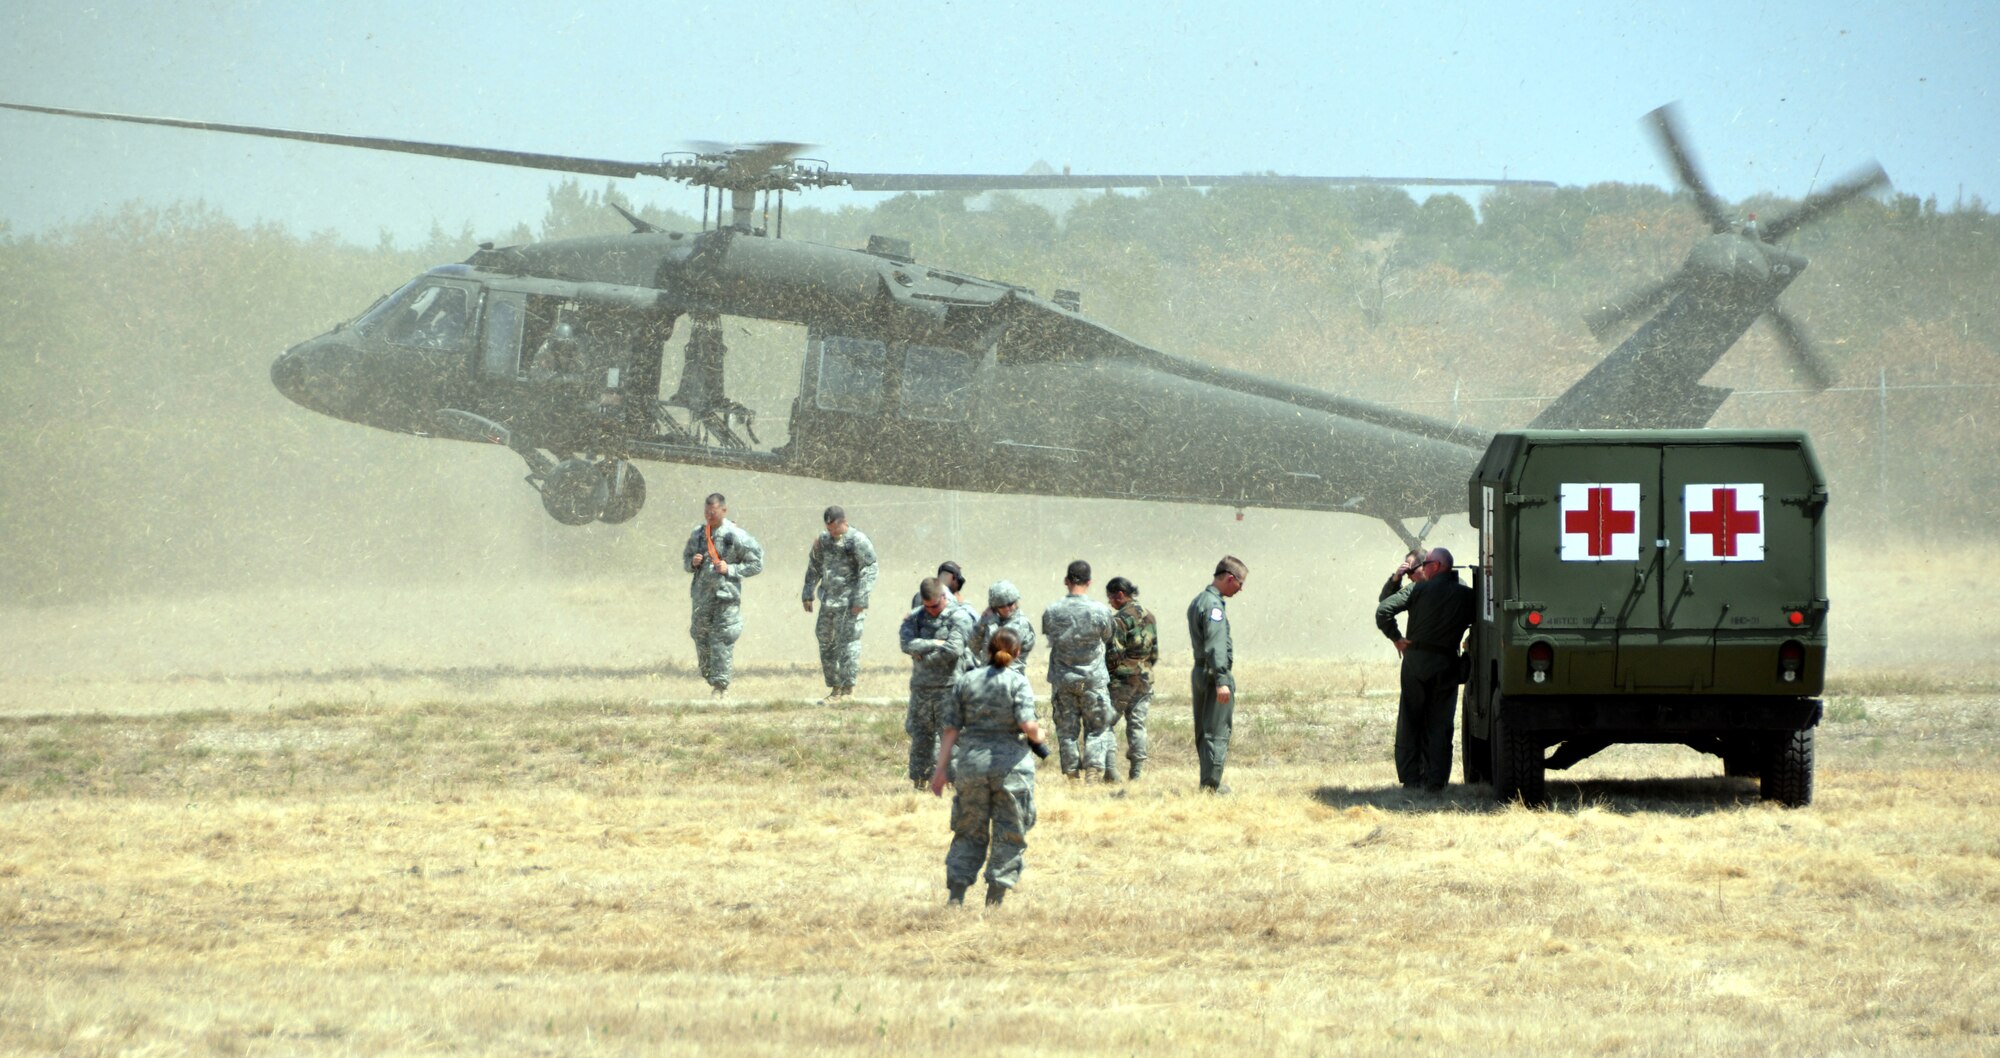 An Army Blackhawk helicopter from the 7th Battalion – 158th Aviation Regiment, Fort Hood, lands to pick up another load of simulated casualties during day one of the joint Mass Casualty Exercise held at the Army Reserve Center, Fort Worth September 10 and 11.  Medical personnel from the 301st MDS, Army, Navy and other emergency responders participated in the exercise. The exercise which pulled together military and civilian units and emergency responders from around the area was used to sharpen the operational skills and procedures of the organizations during joint operations.  (U.S. Air Force photo/Staff Sgt Chris Bolen)